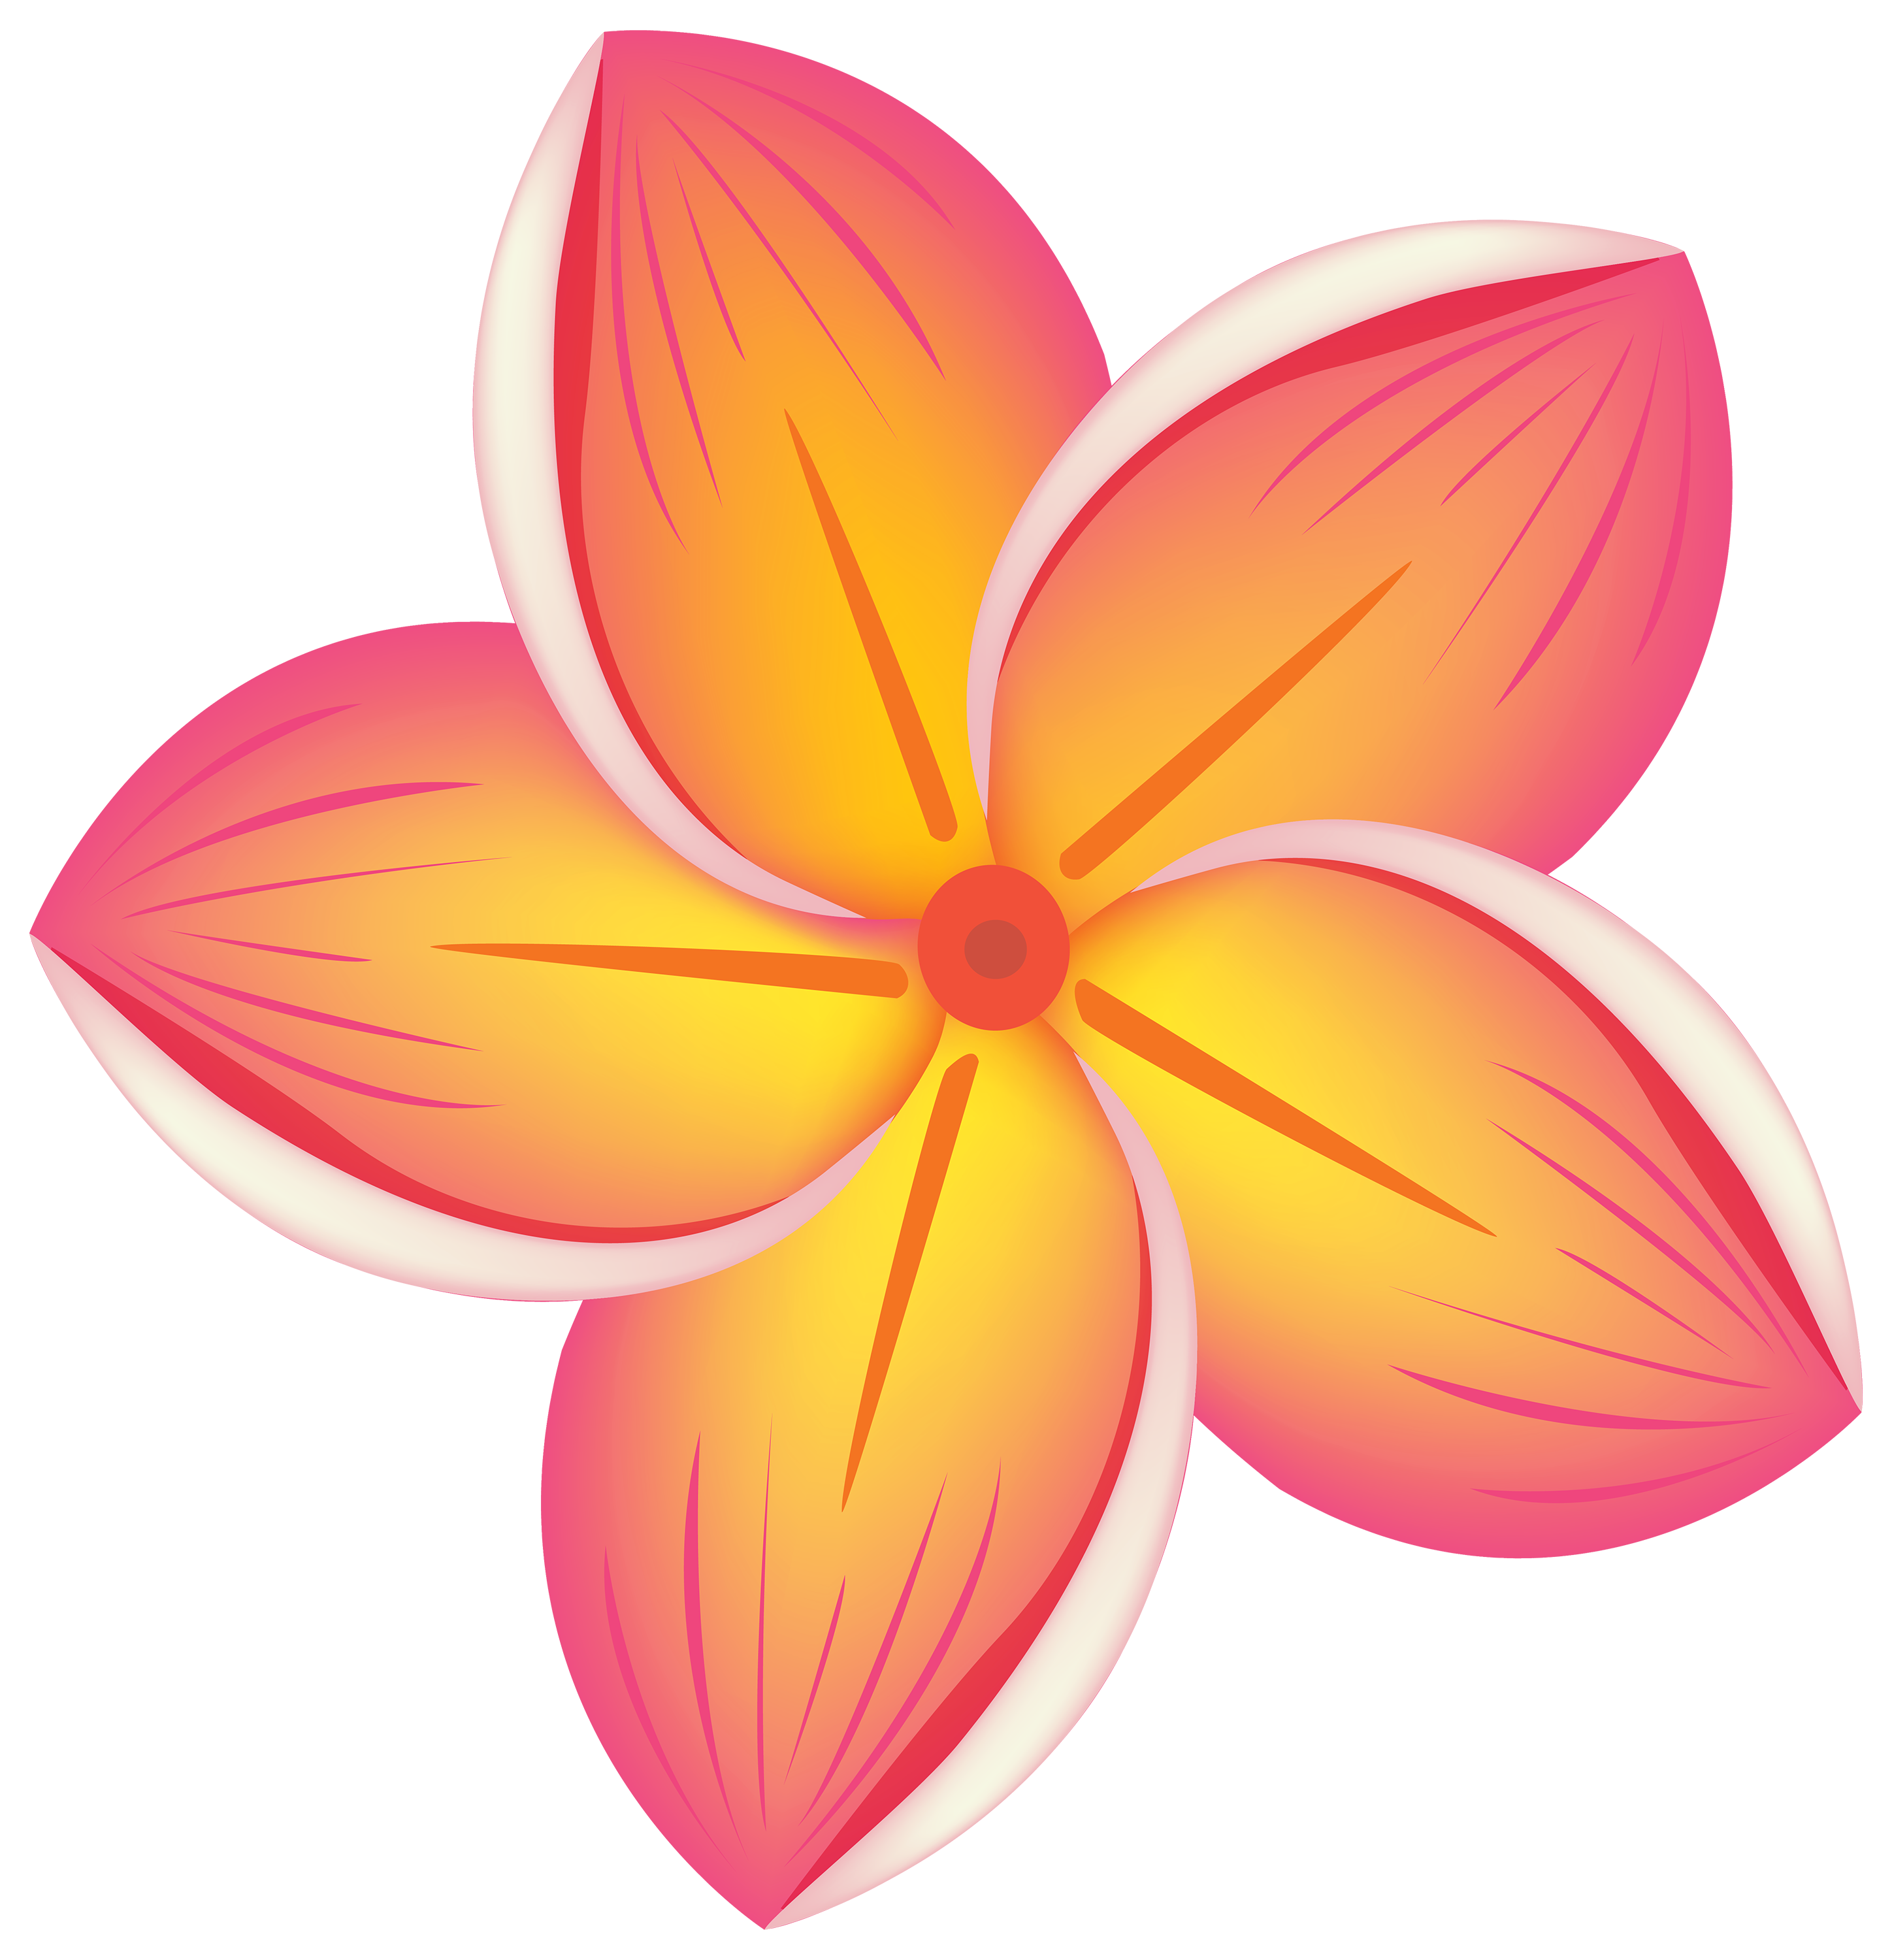 clipart on flowers